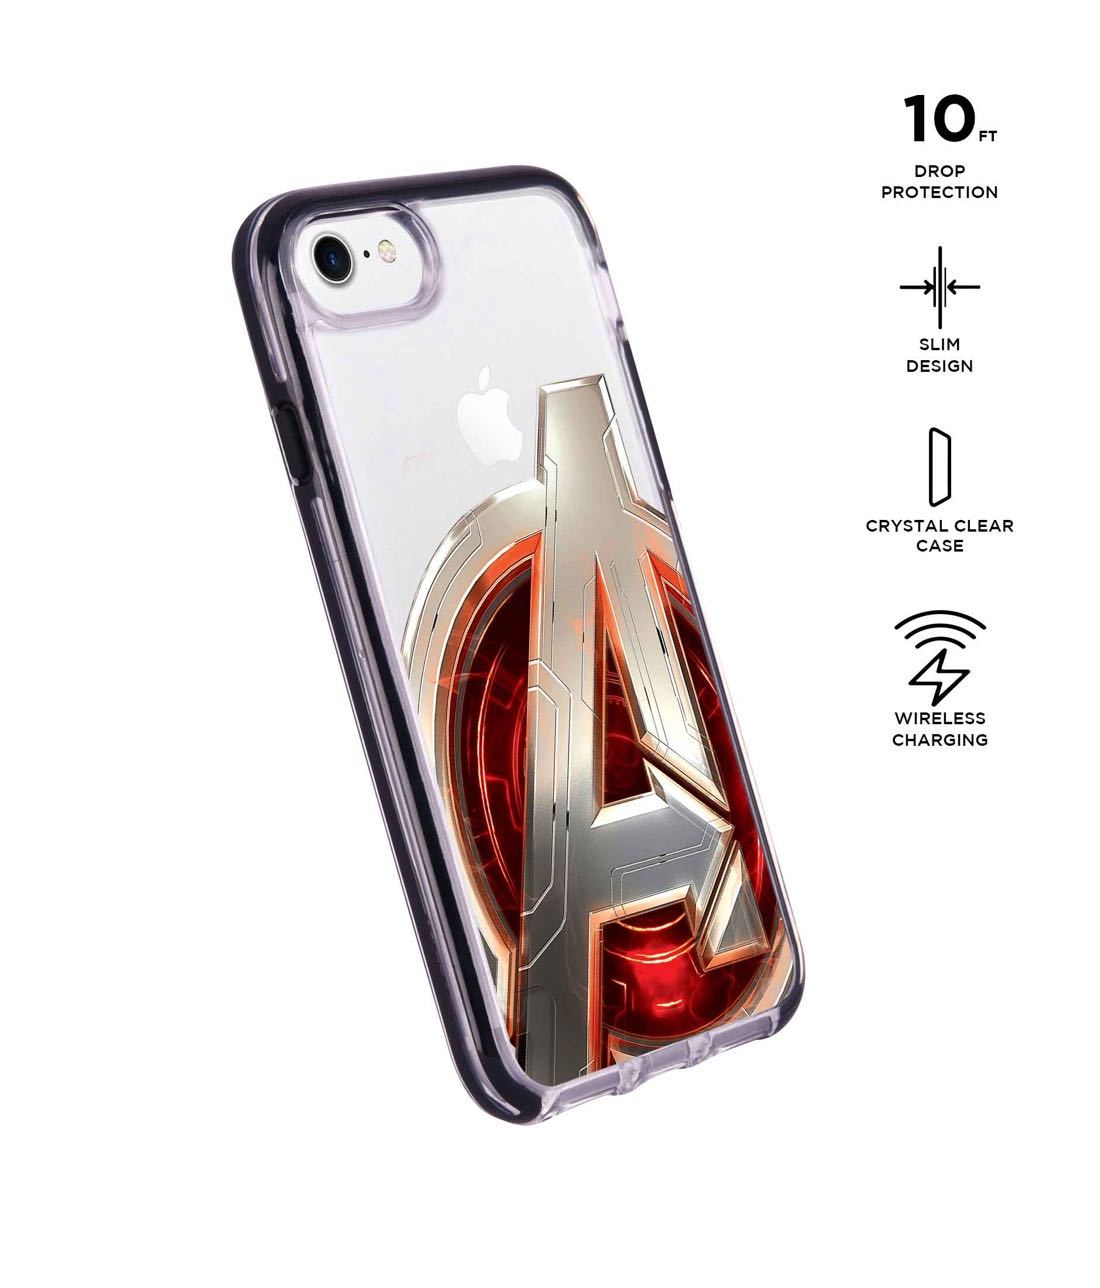 Avengers Version 2 - Extreme Phone Case for iPhone 7